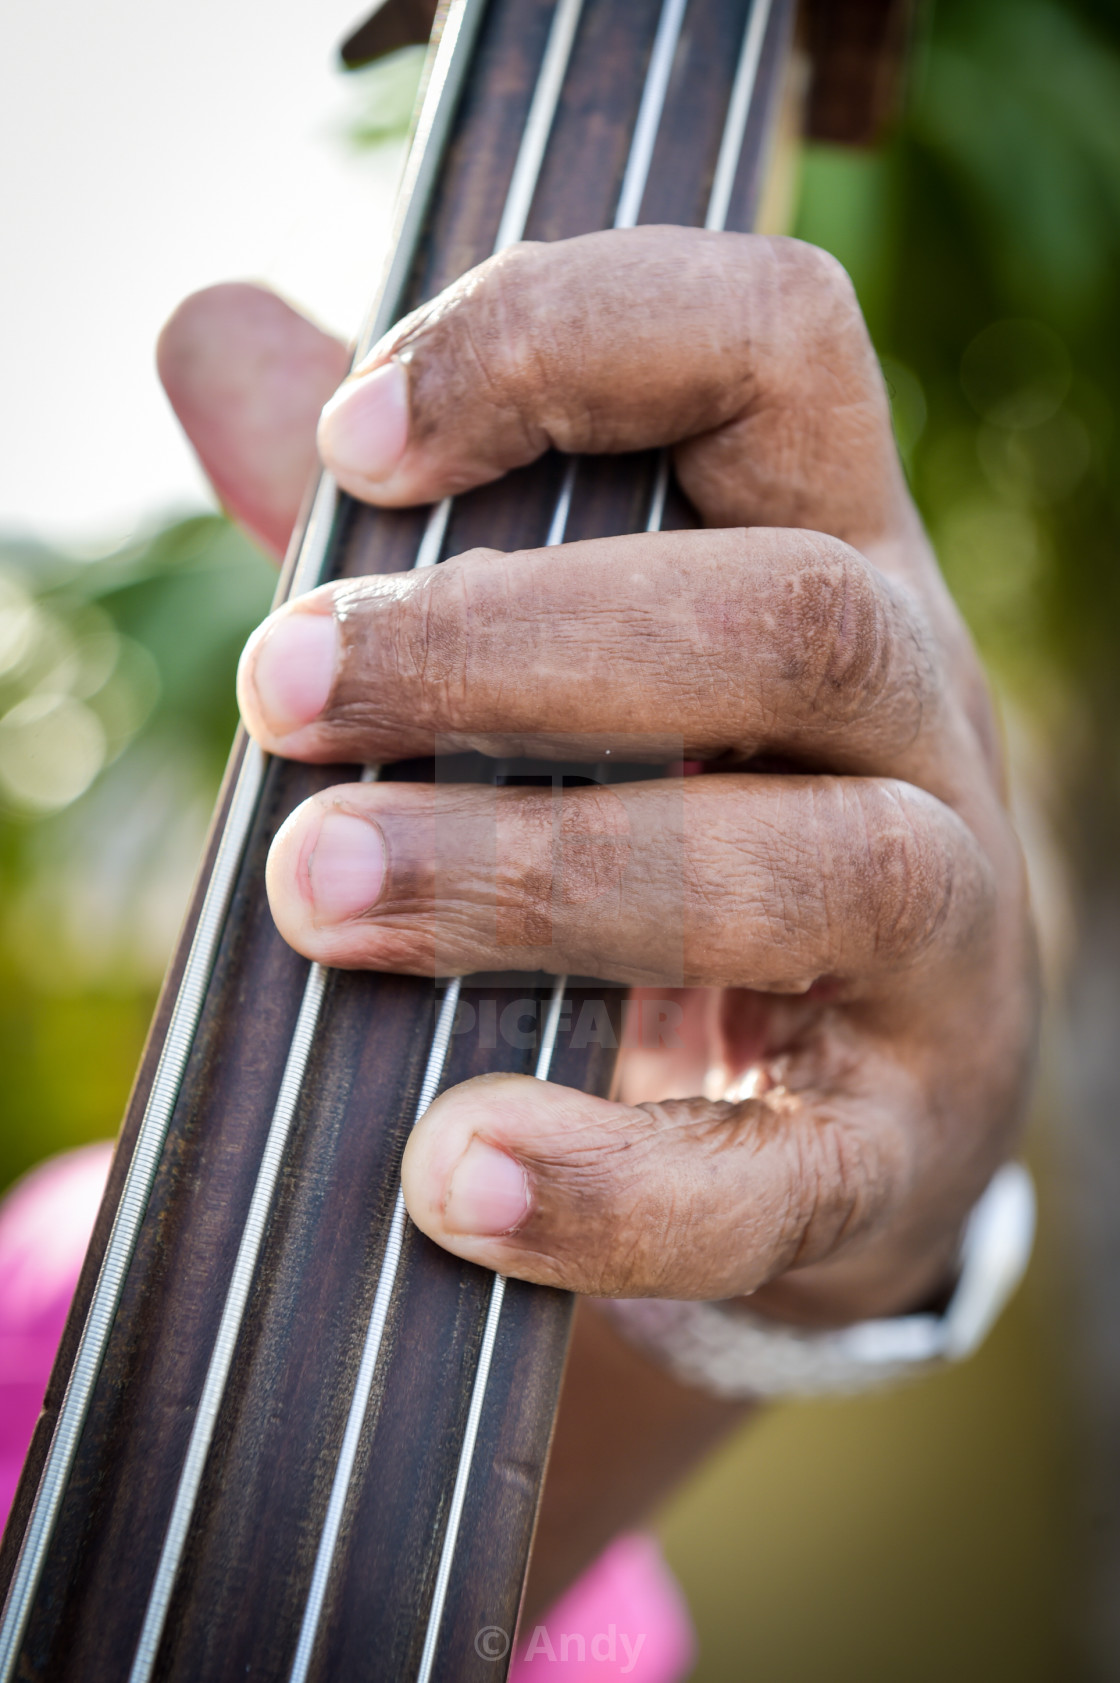 "Fingers on the Bass" stock image